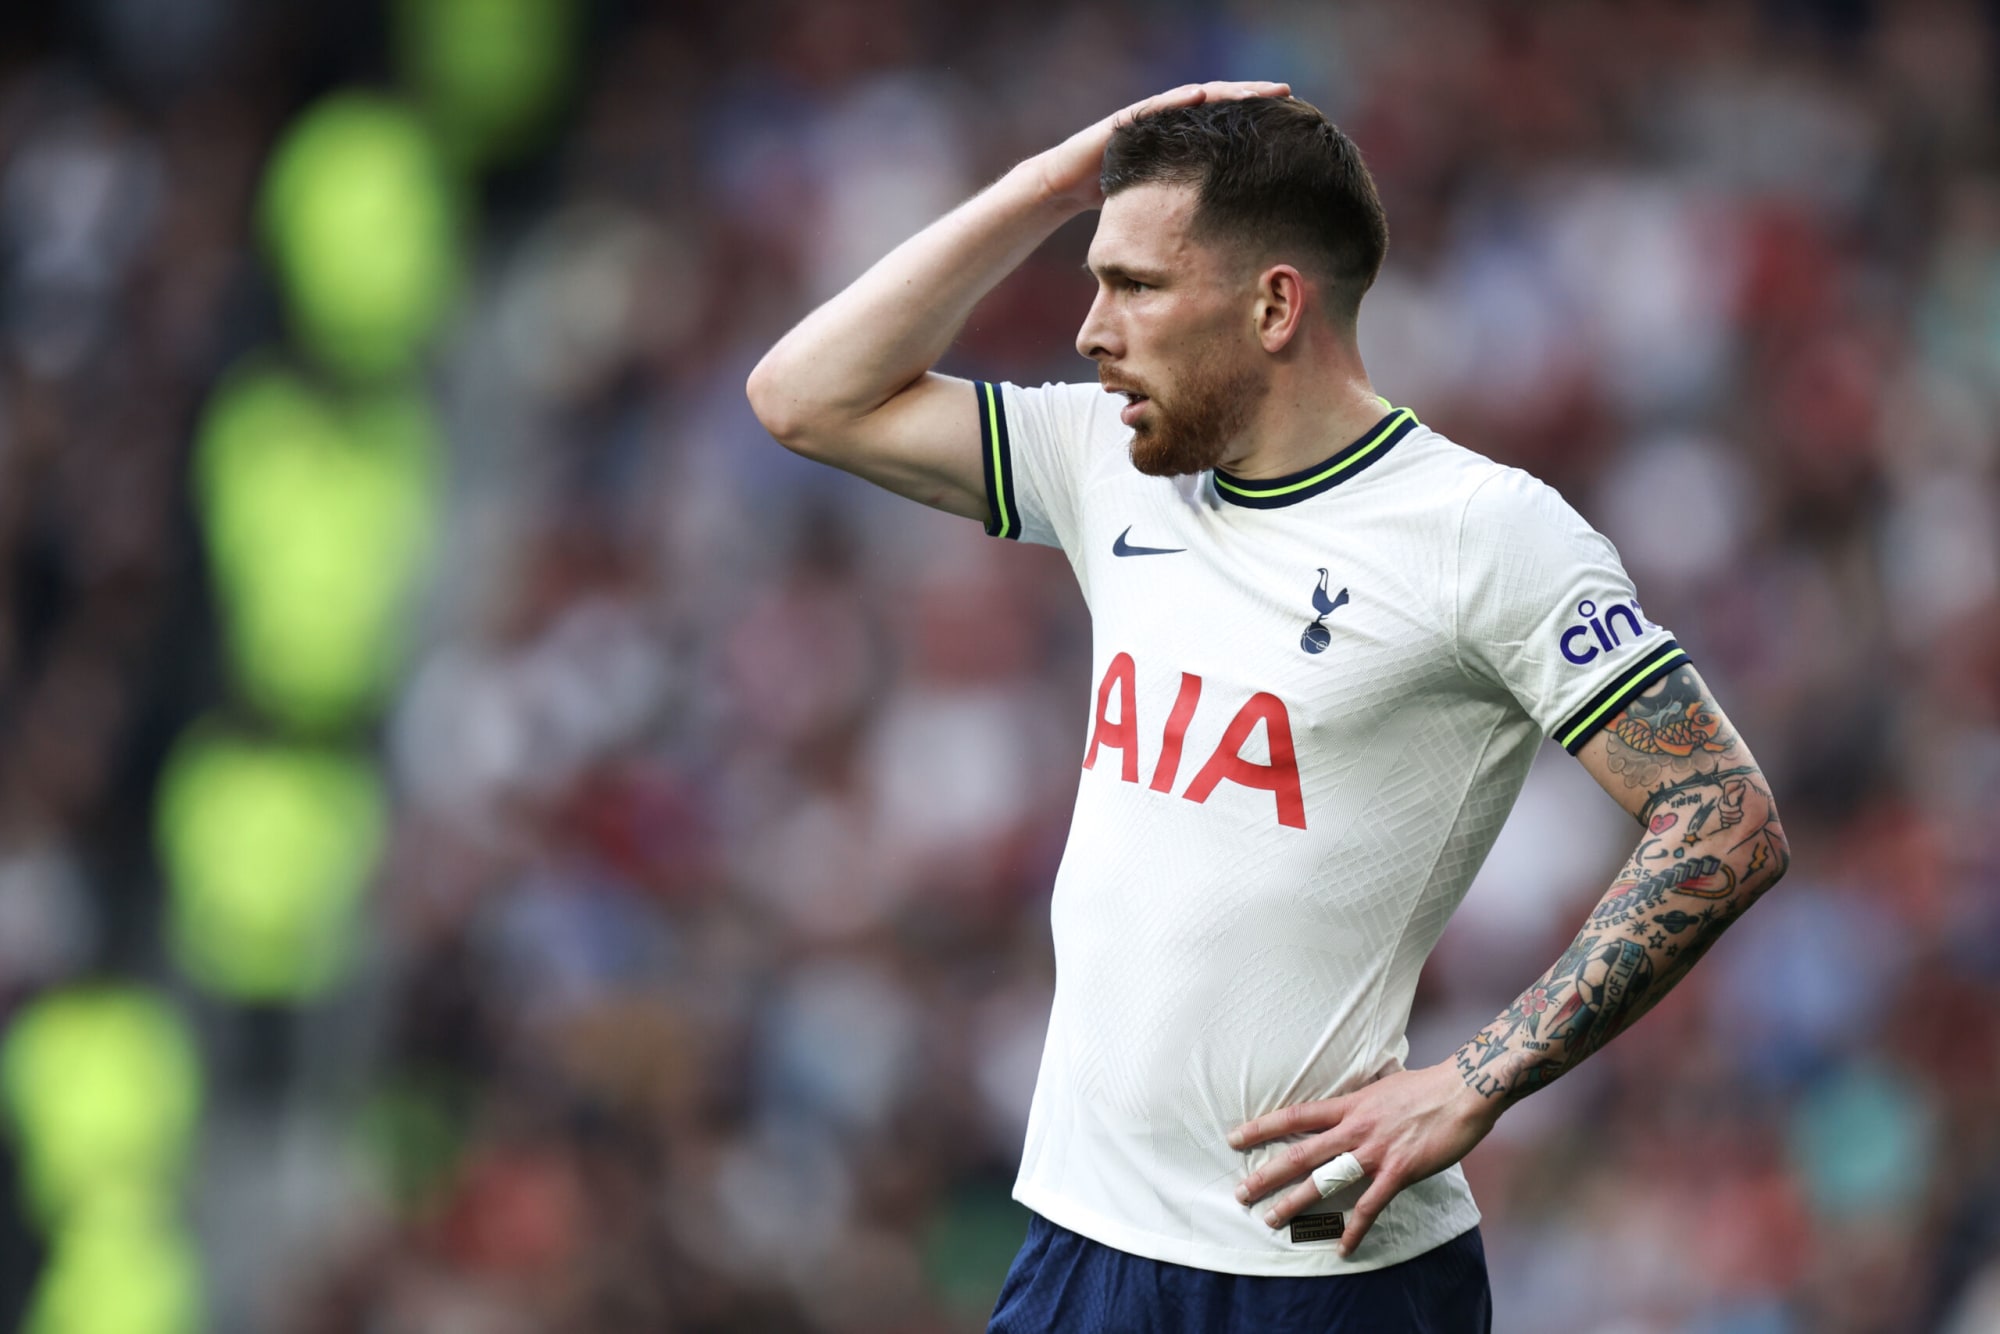 Discussions started between Atletico and Tottenham over Hojbjerg